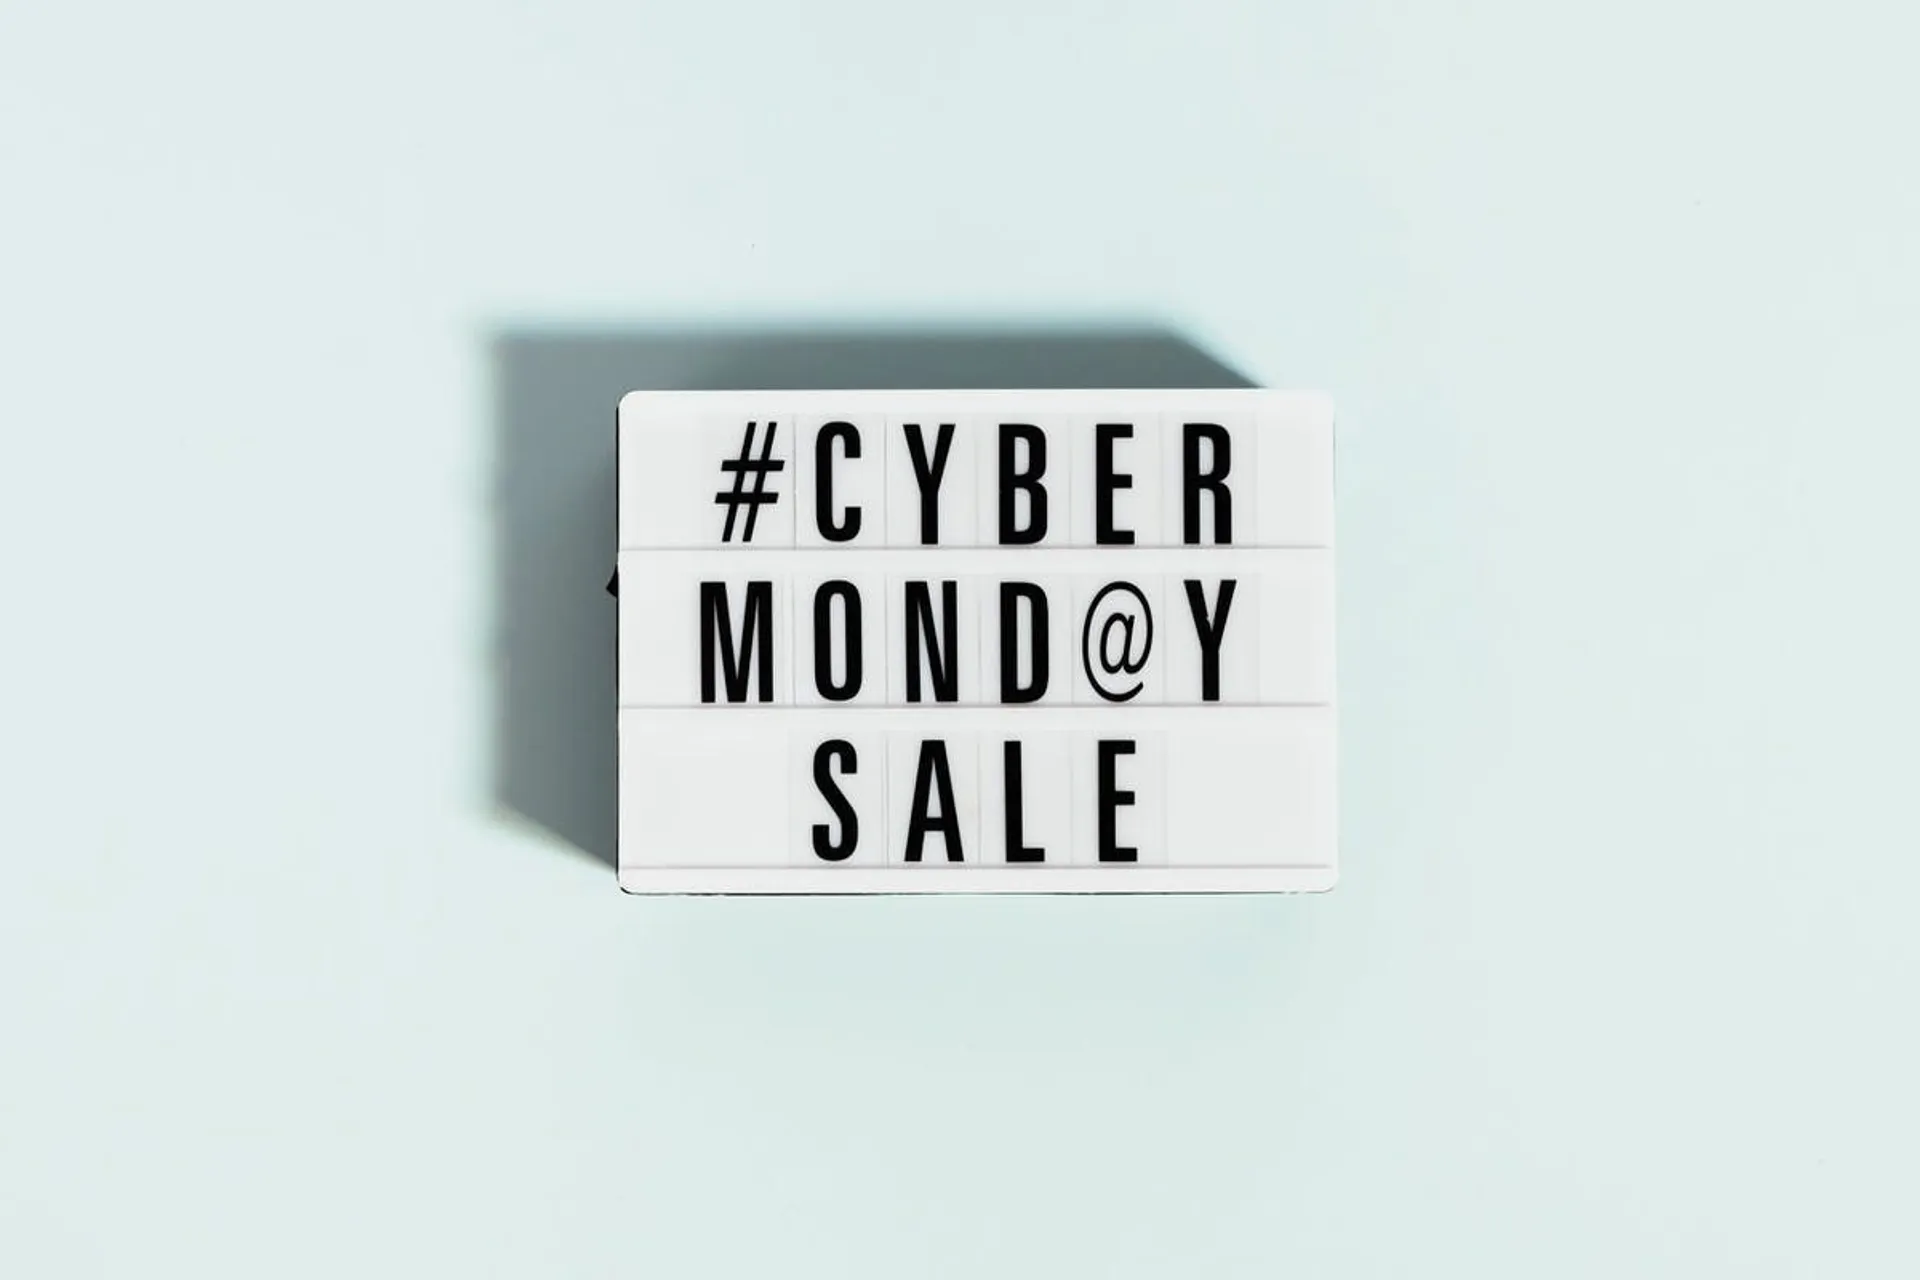 Cyber Monday deals that will blow your mind